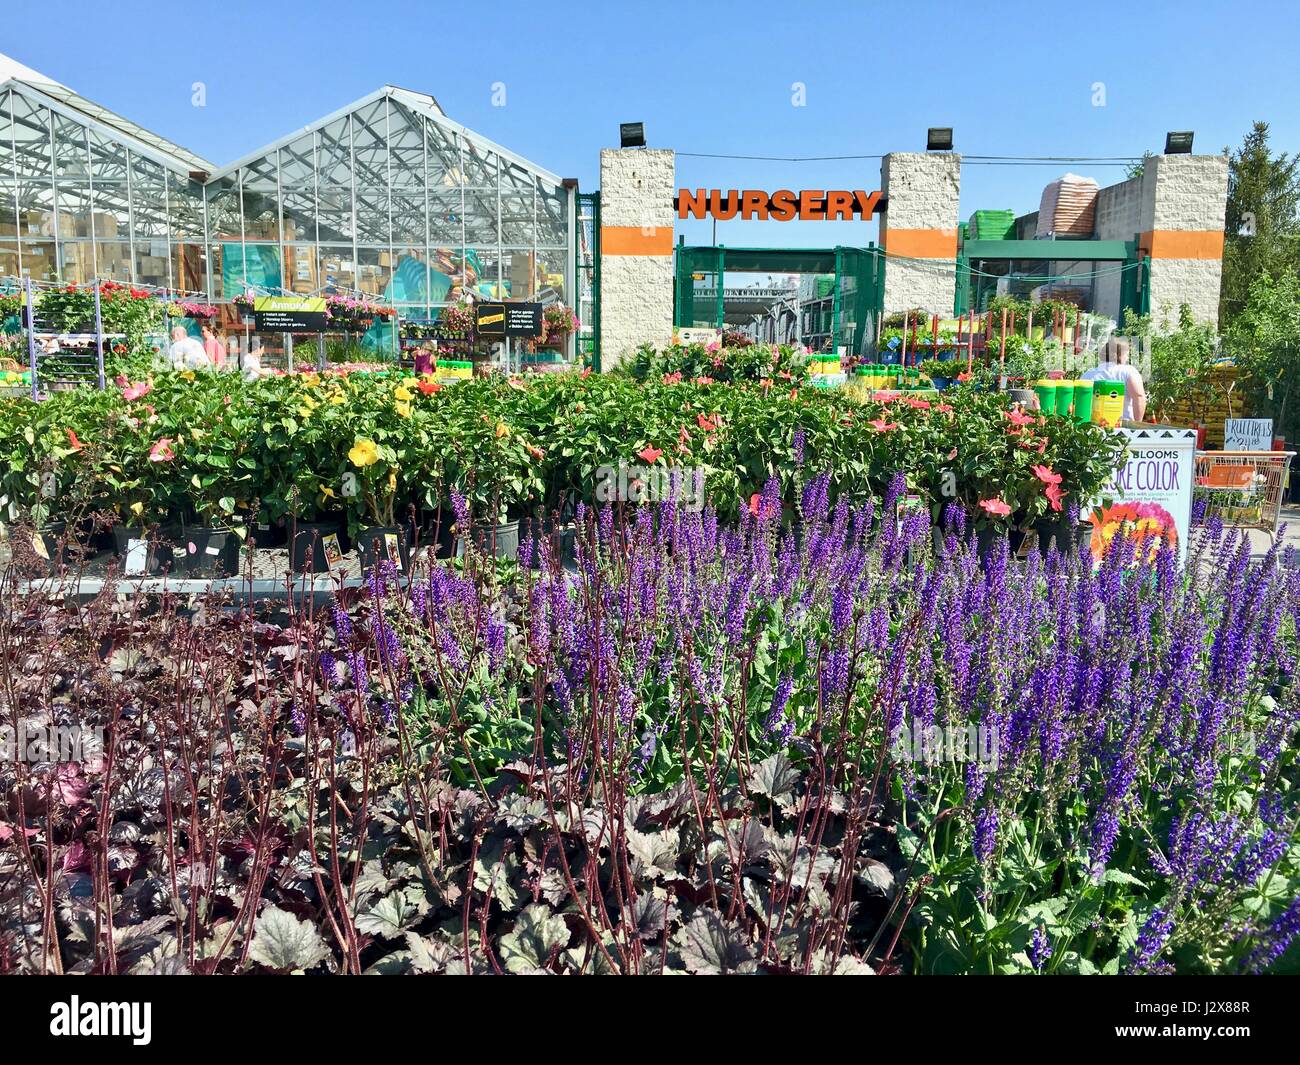 Home Depot Nursery filled with fresh plants, flowers, and gardening supplies Stock Photo